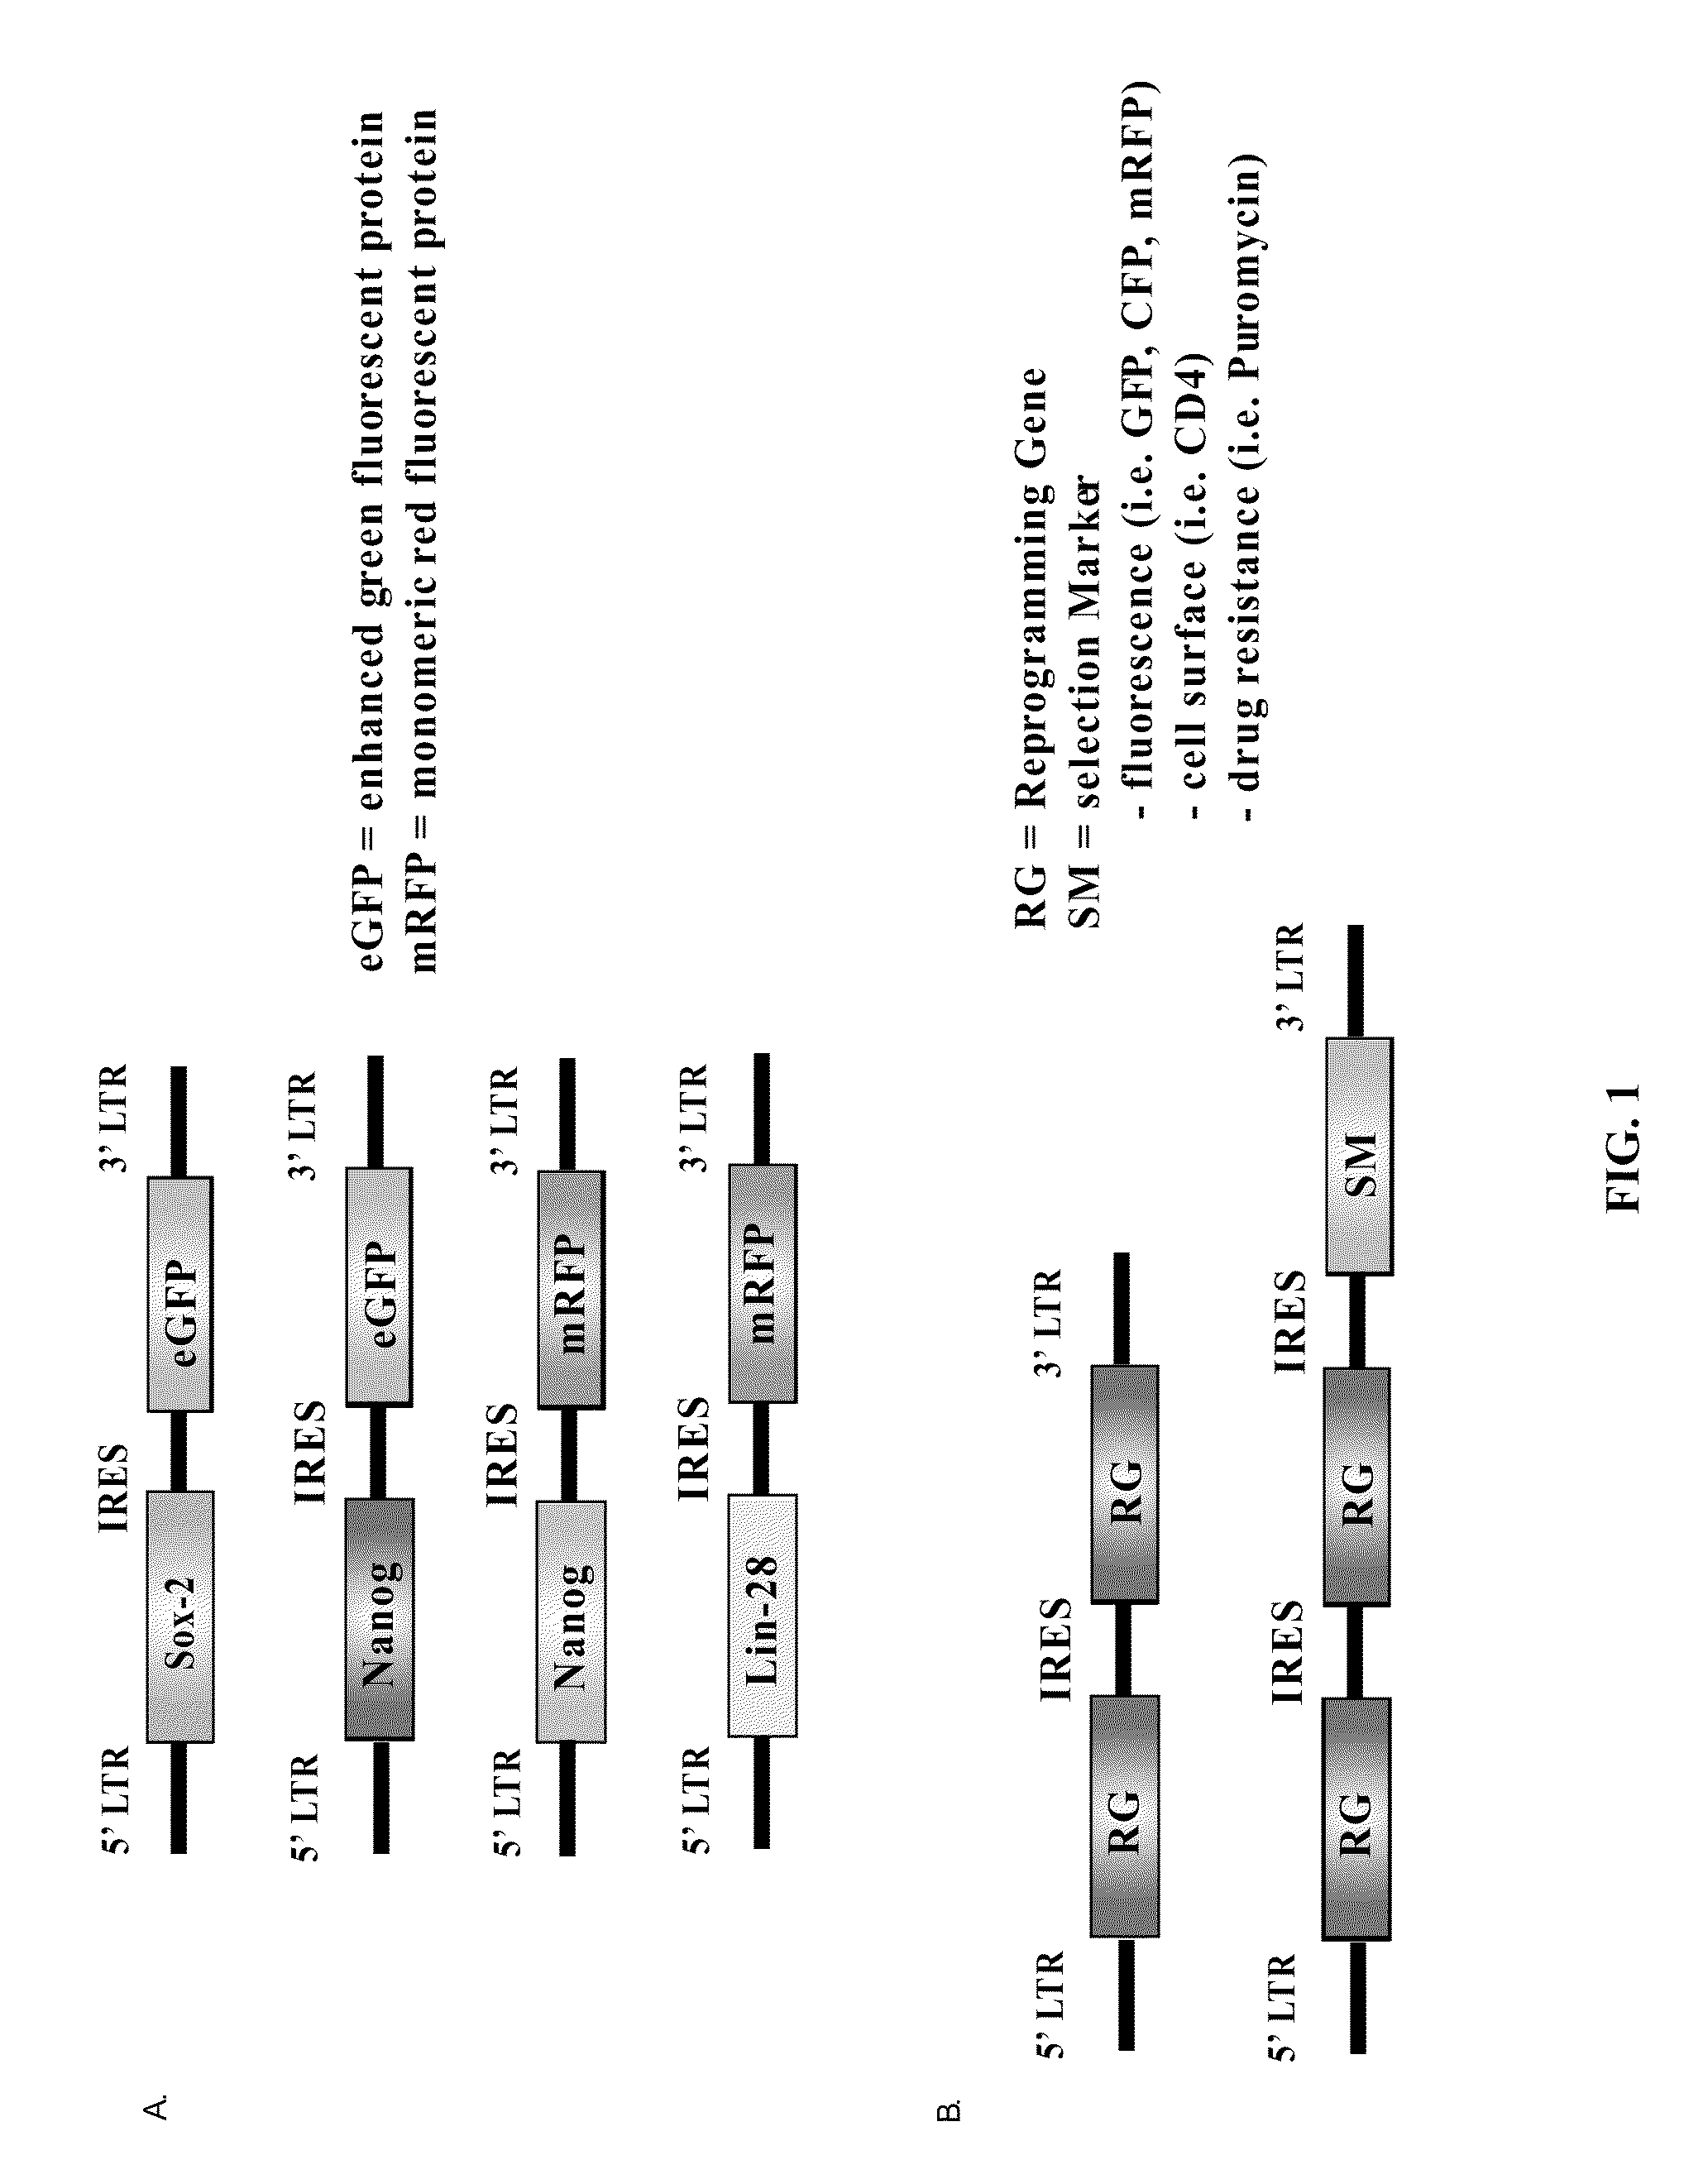 Methods for the production of ips cells